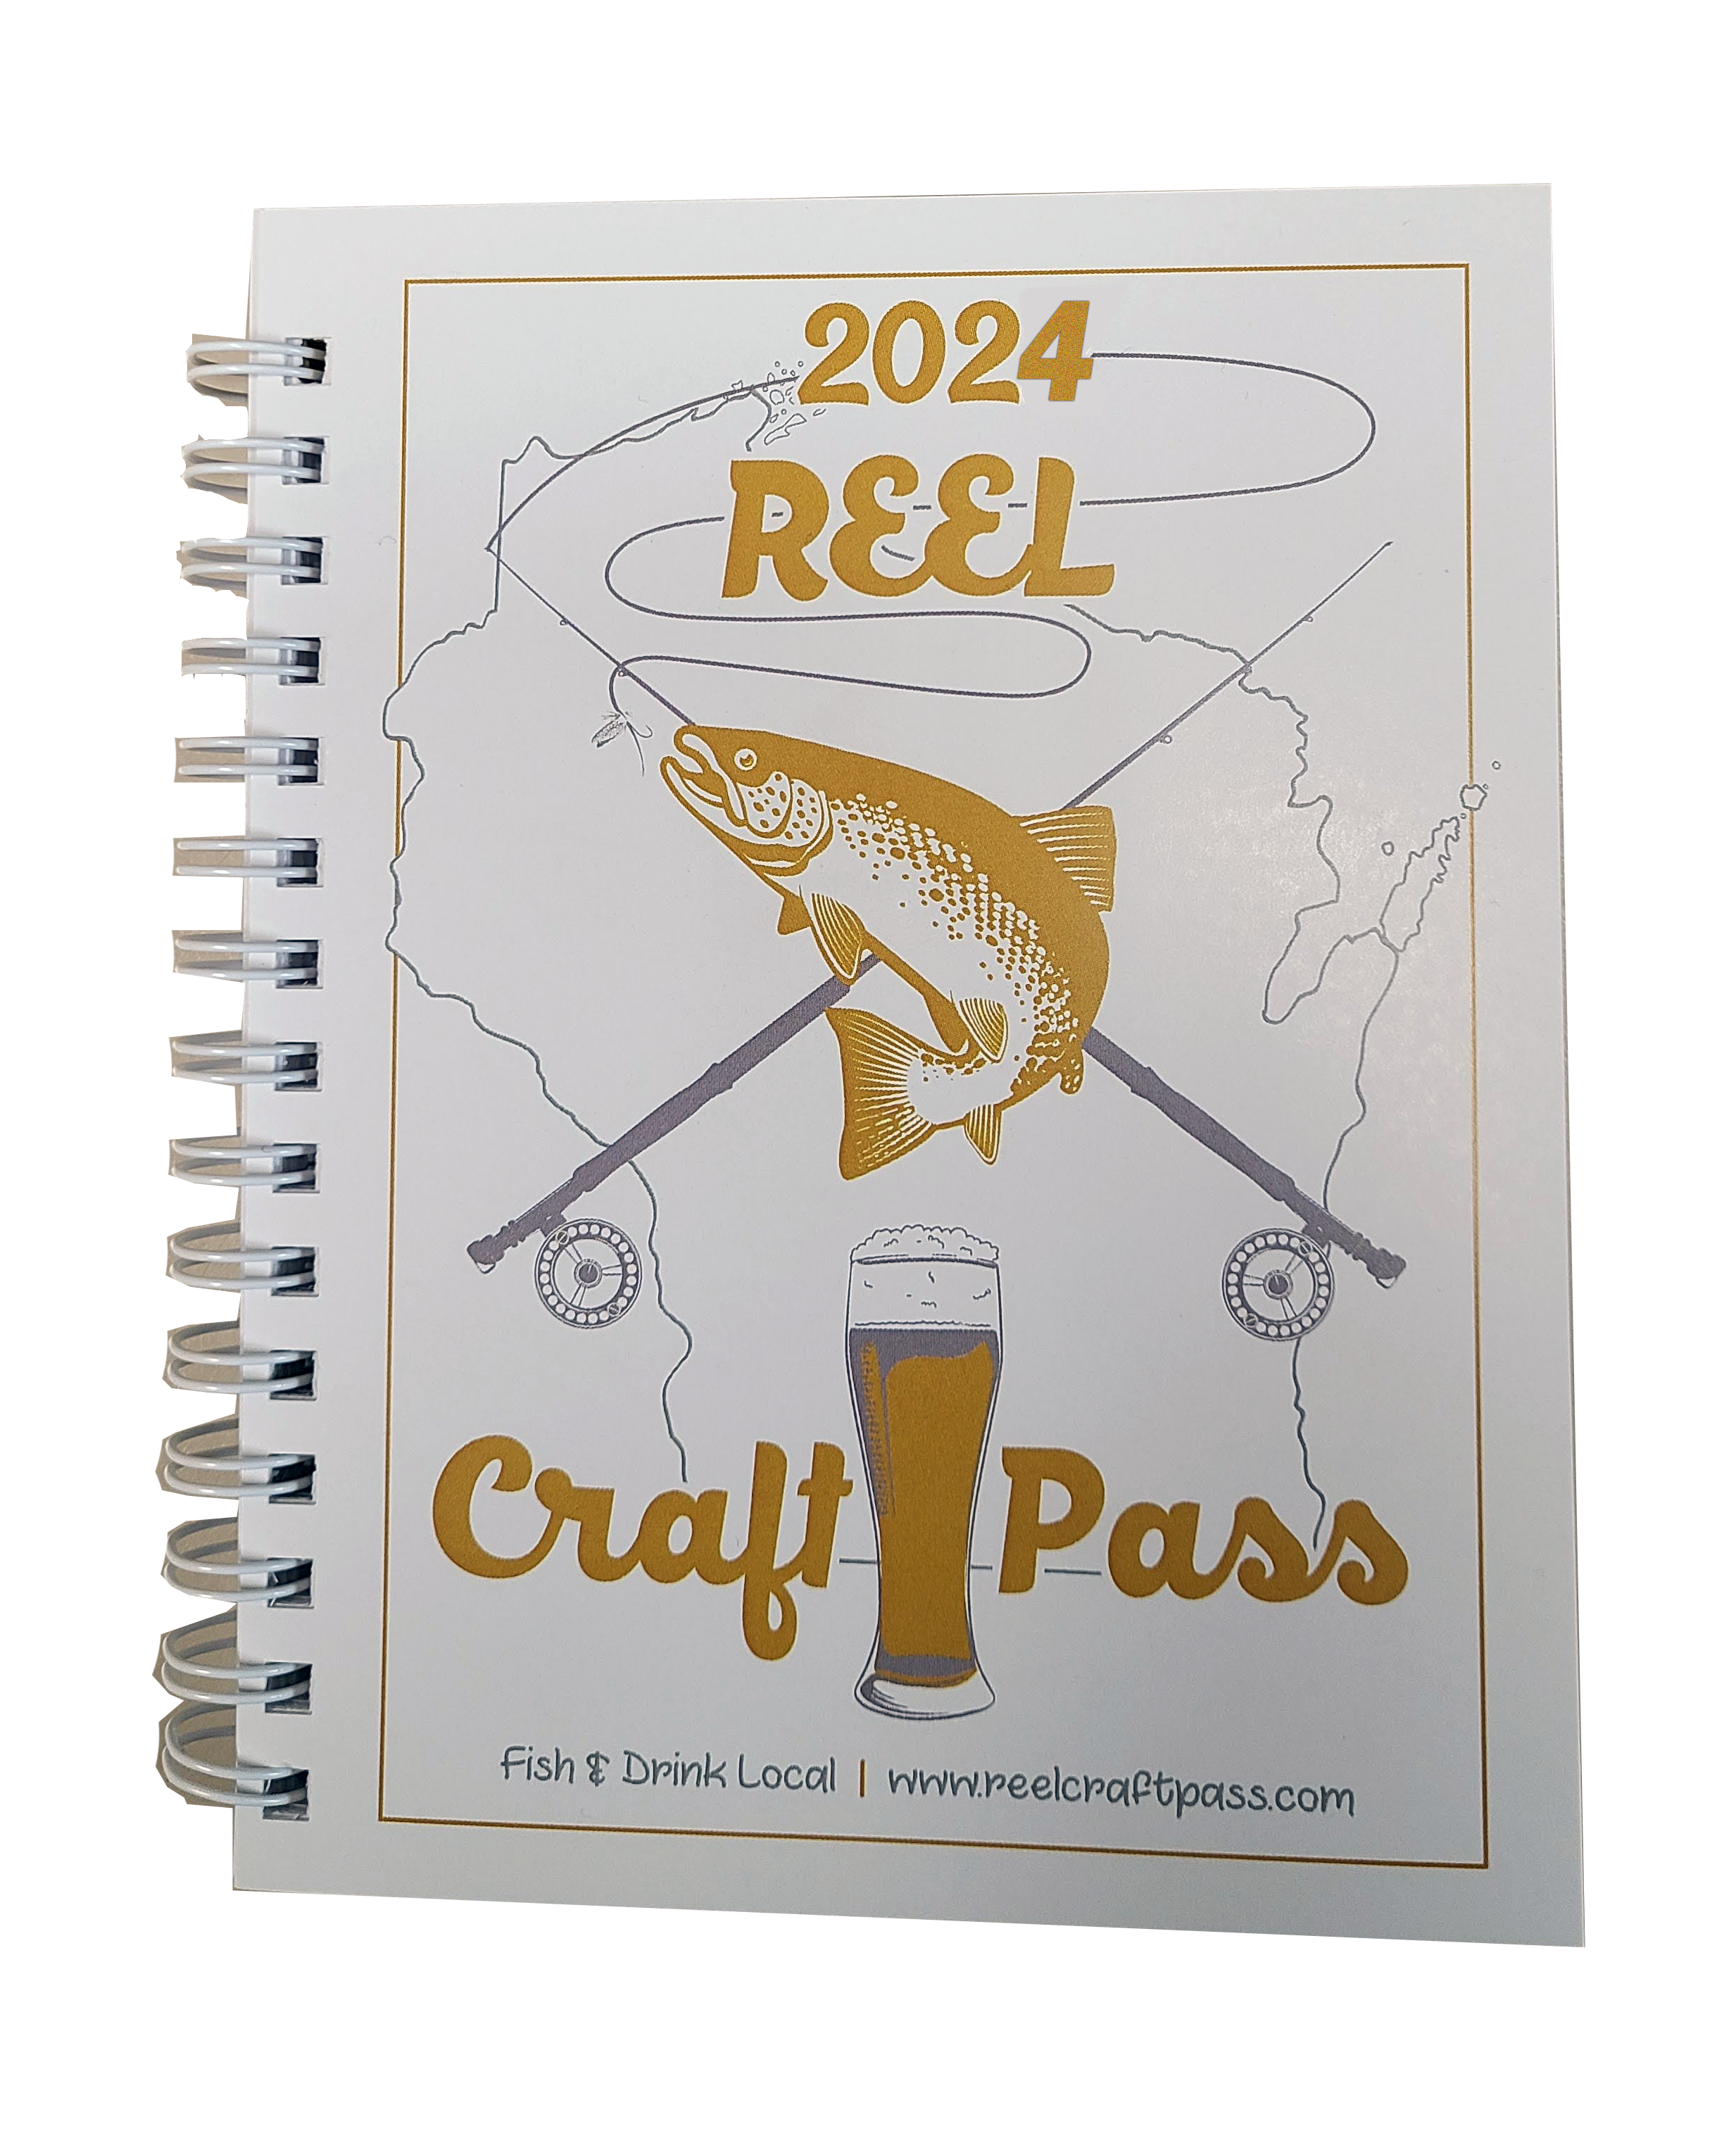 Product Image - WI Reel Craft Pass